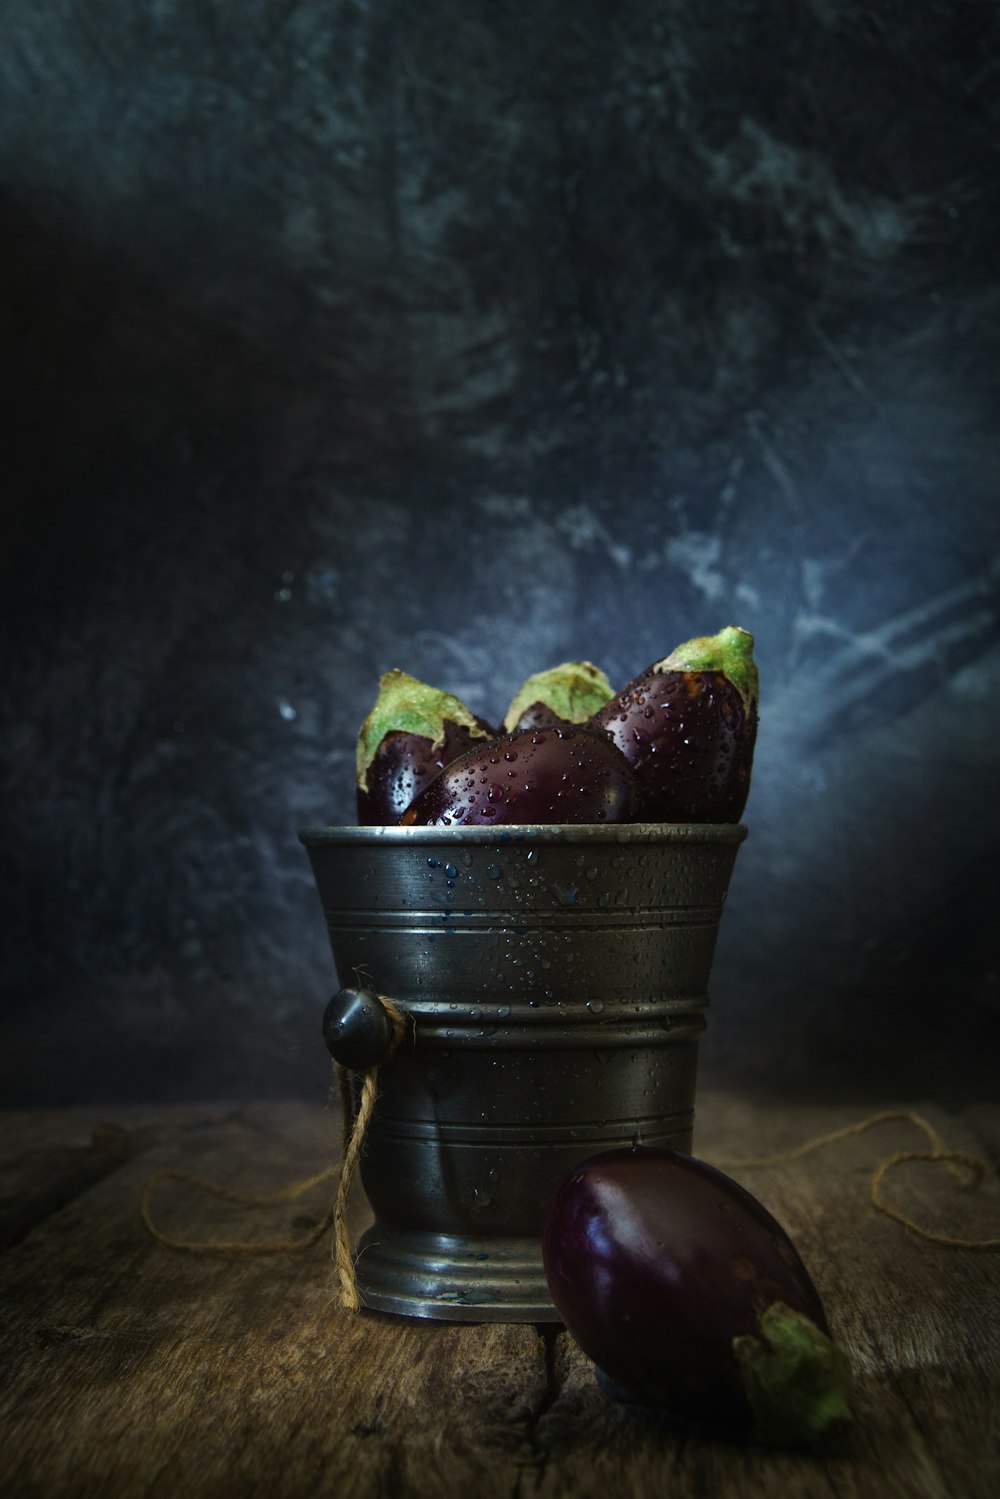 green and red fruit on black metal bucket